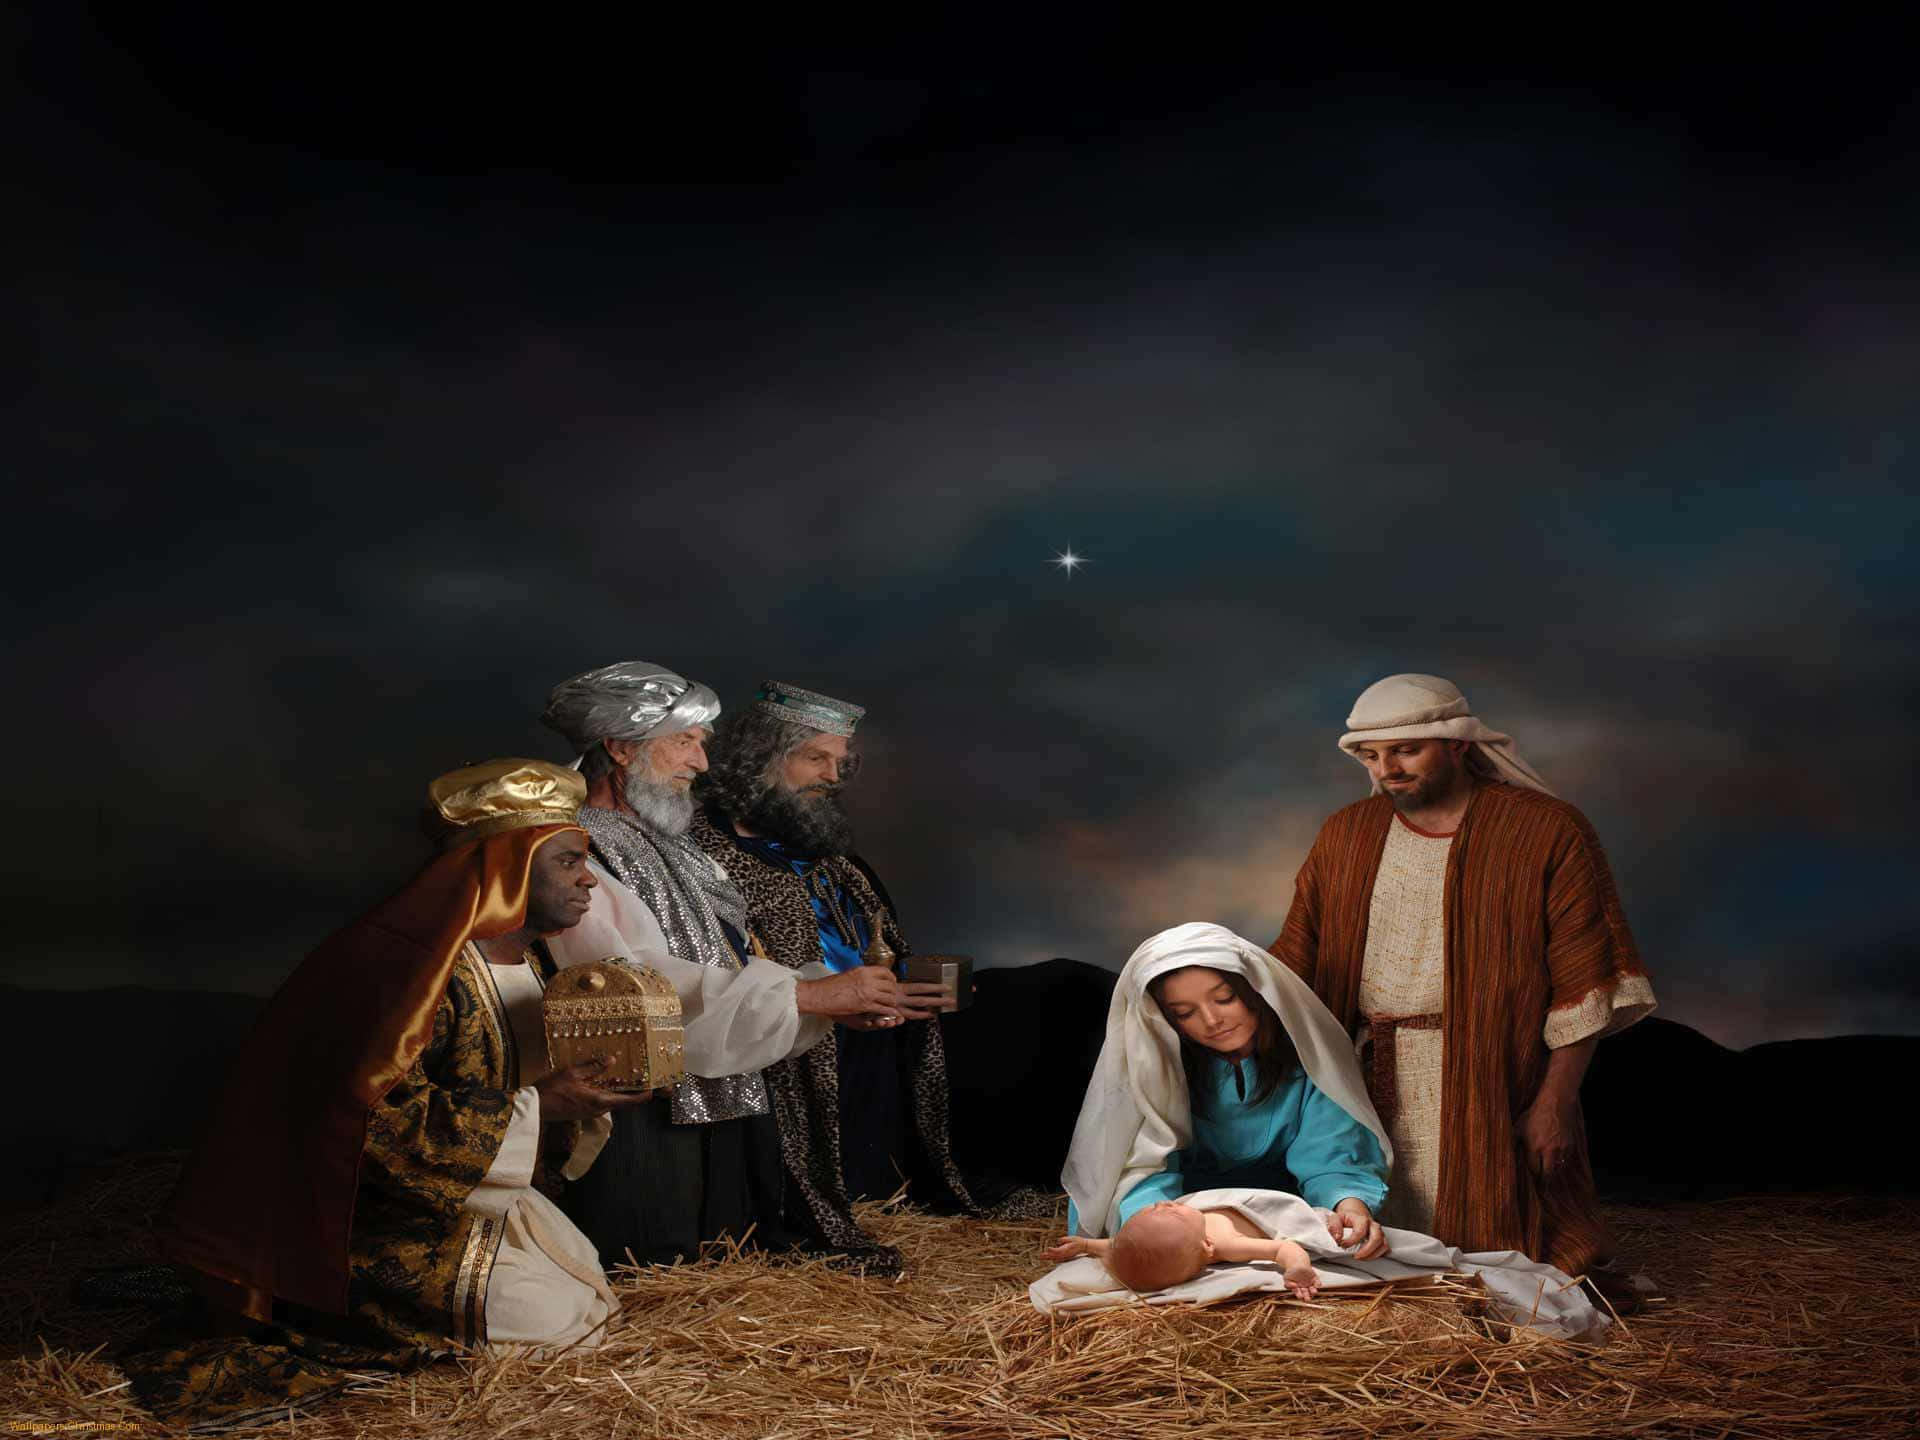 "Adoration of the Shepherds"